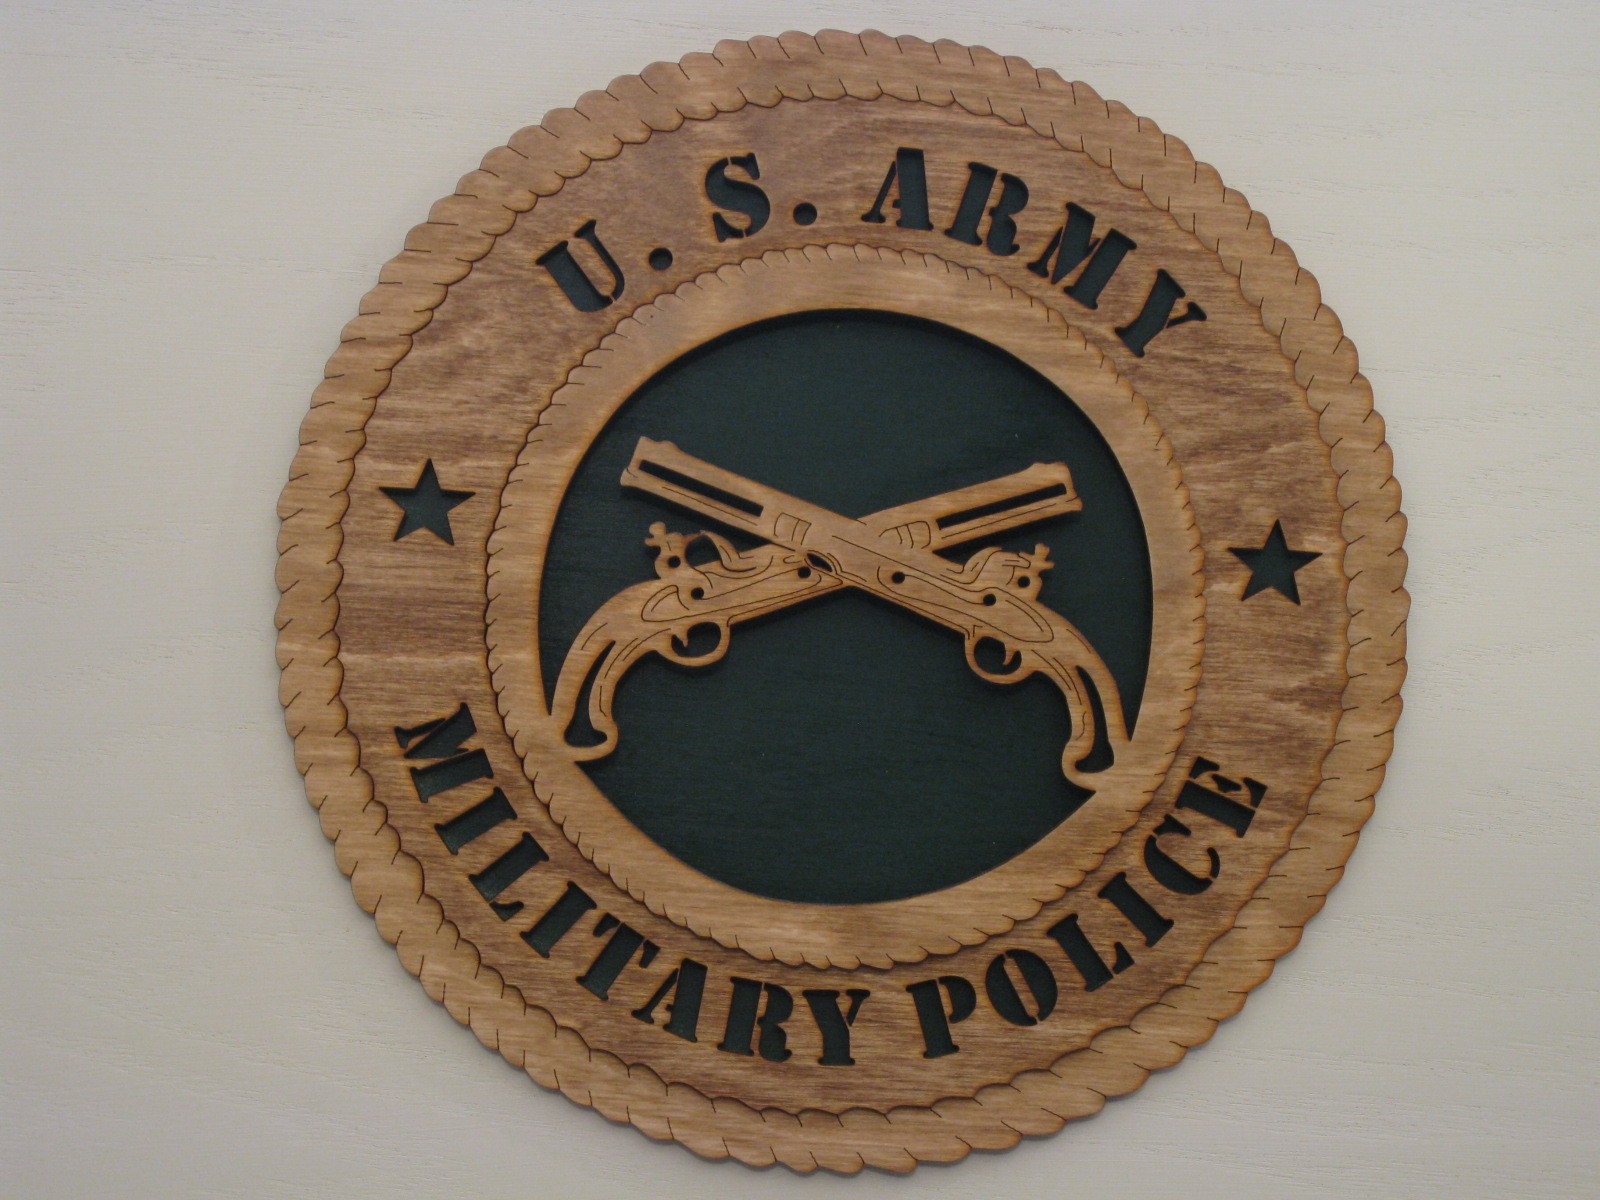 US Army Military Plaque   Micks Military Shop